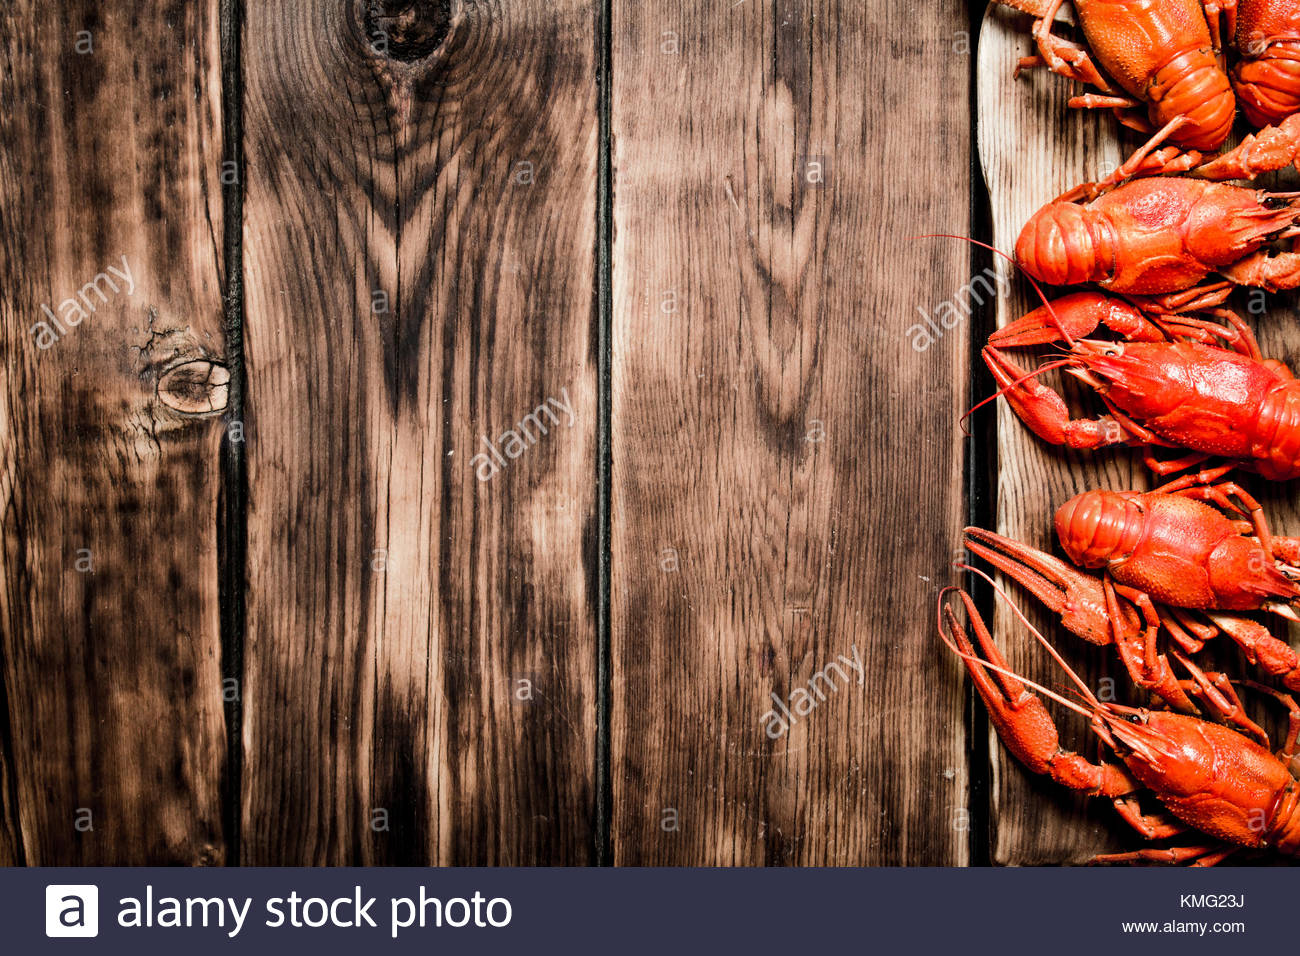 Fresh Boiled Crawfish On The Old Cutting Board Wooden